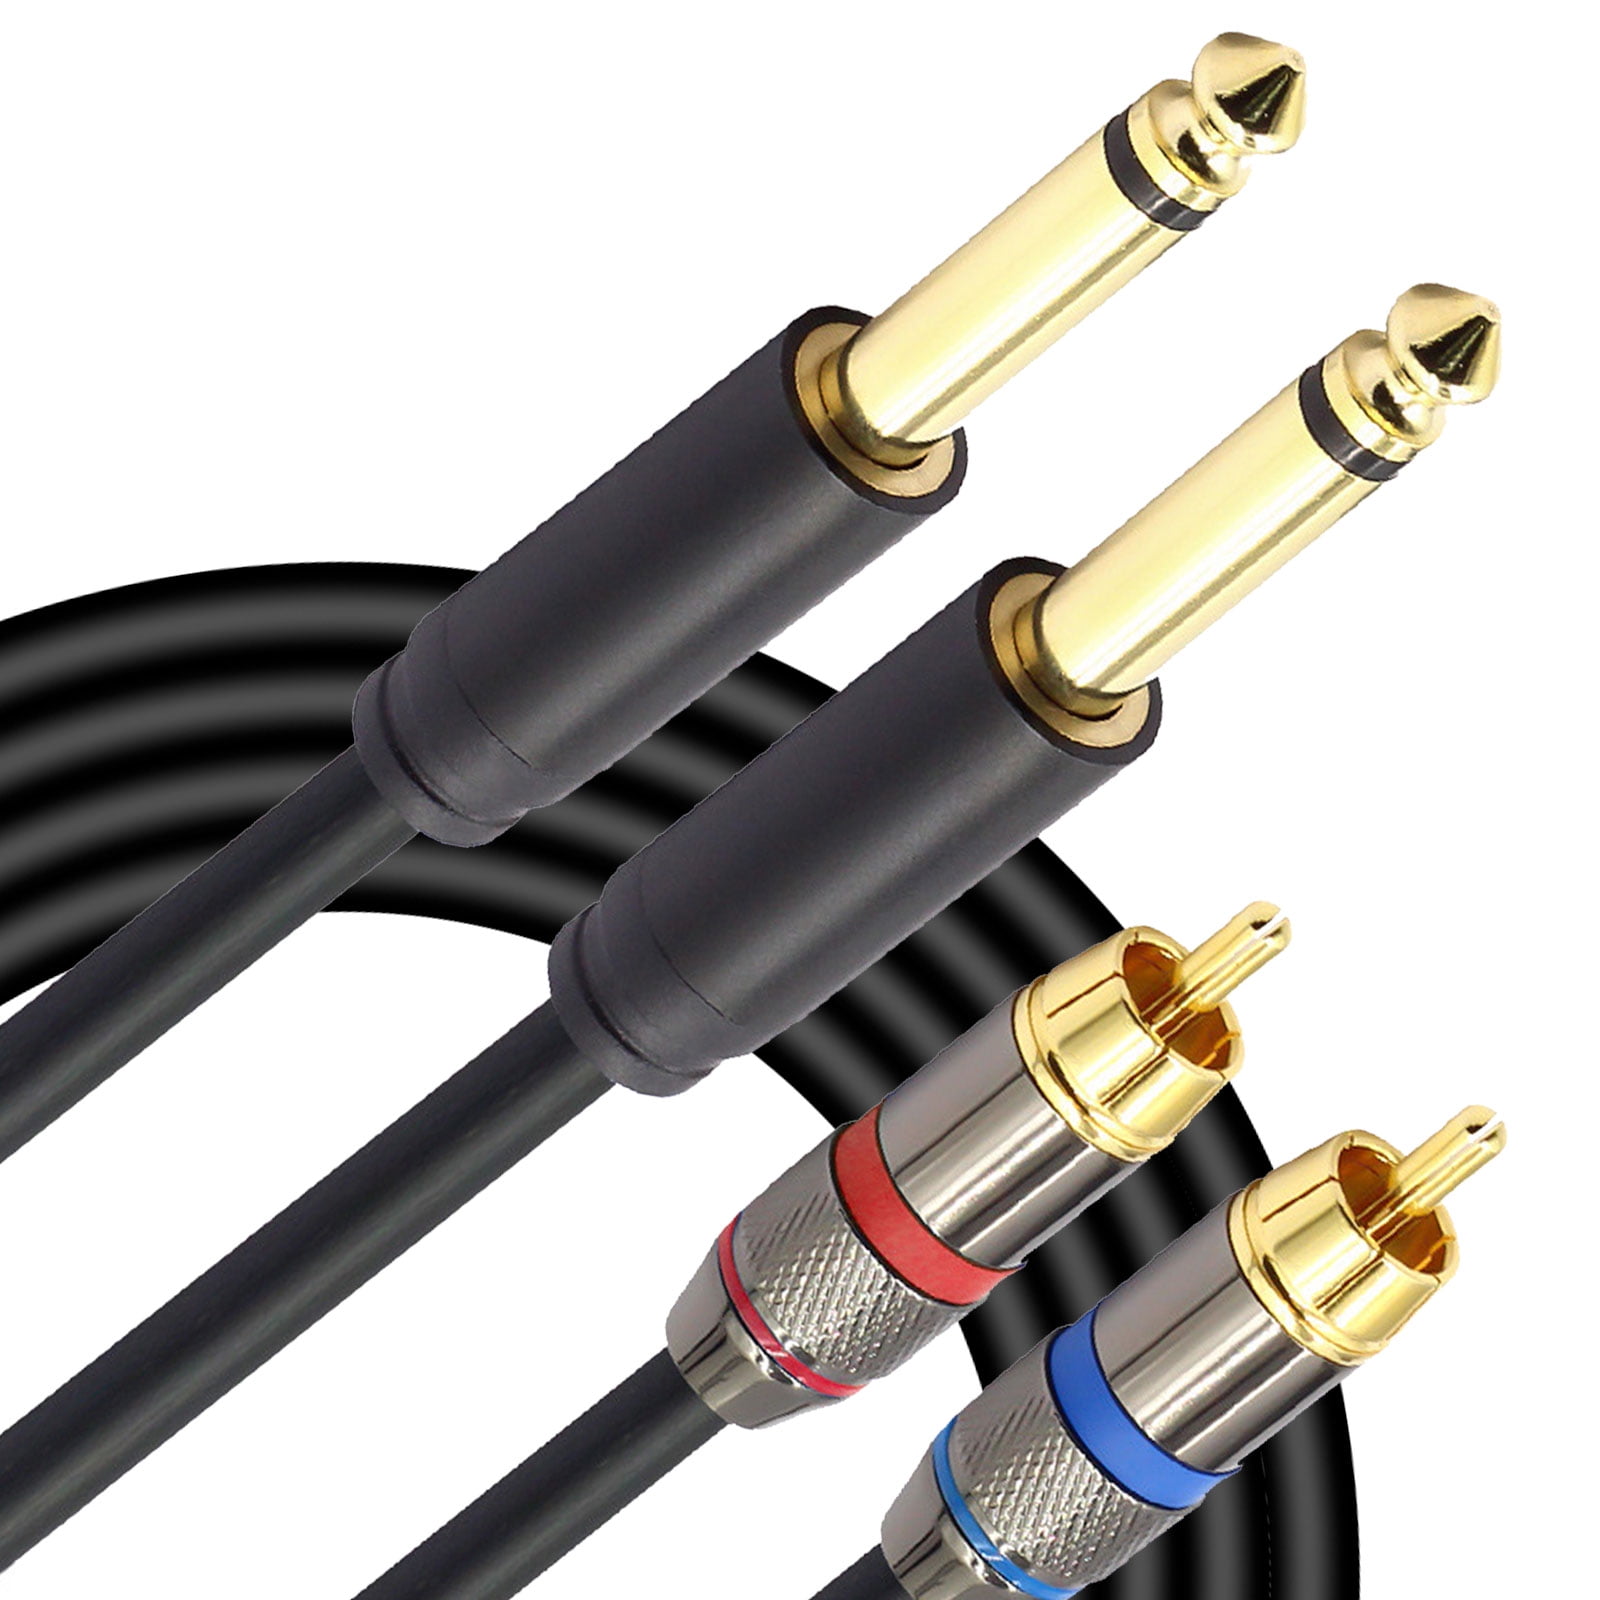 RCA to 1/4 Cable, EEEkit Quarter inch TRS Jack to RCA (Dual 6.35mm Stereo to 2 RCA) Audio Y